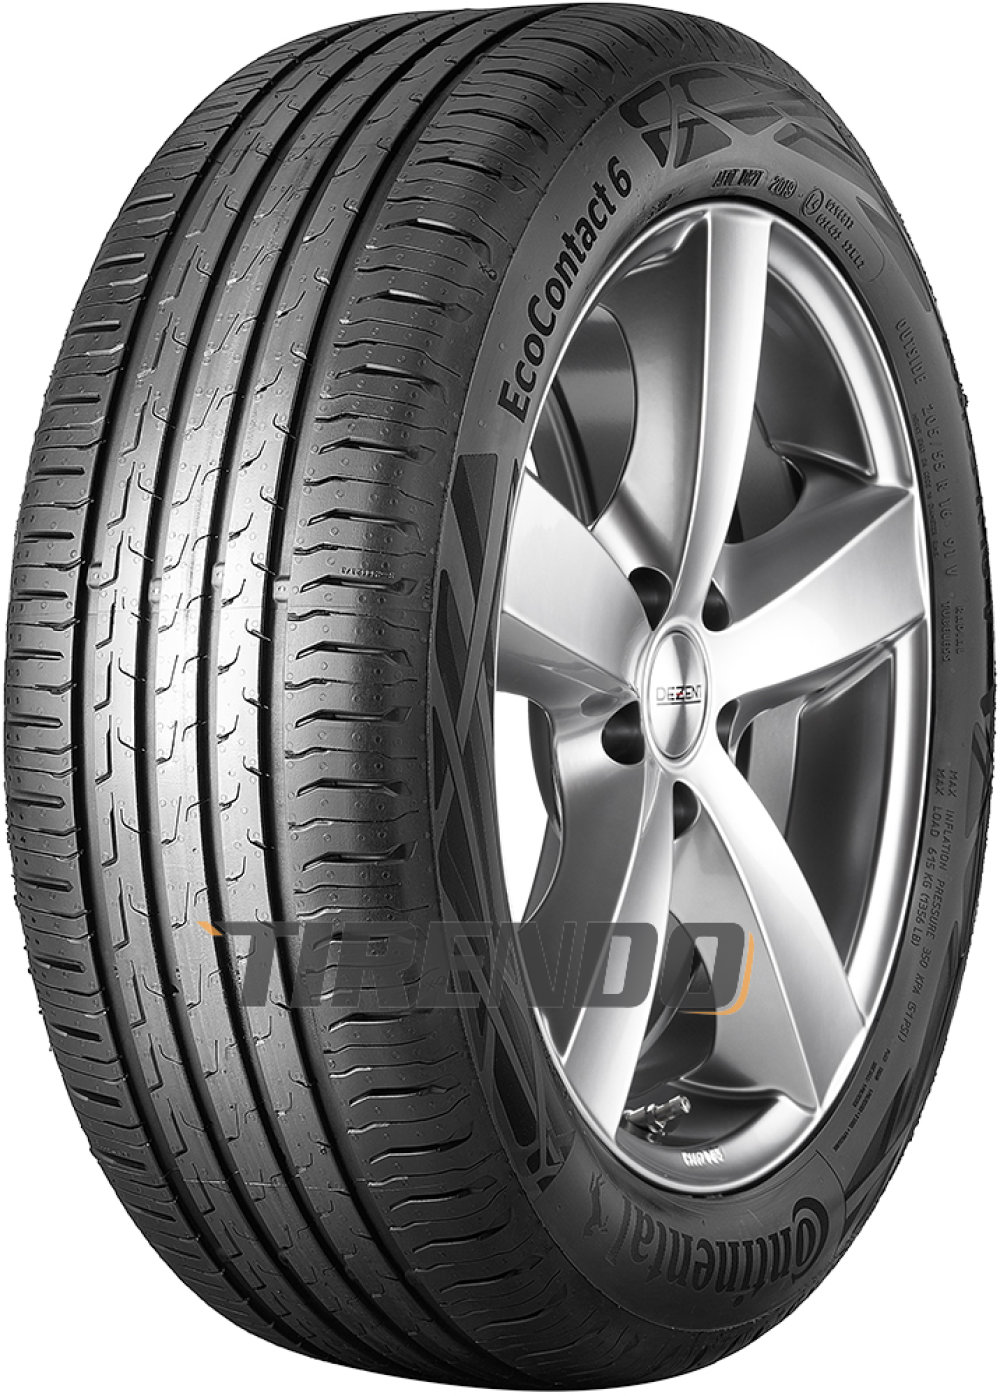 Image of Continental EcoContact 6 ( 195/60 R18 96H XL Conti Seal, EVc, R )